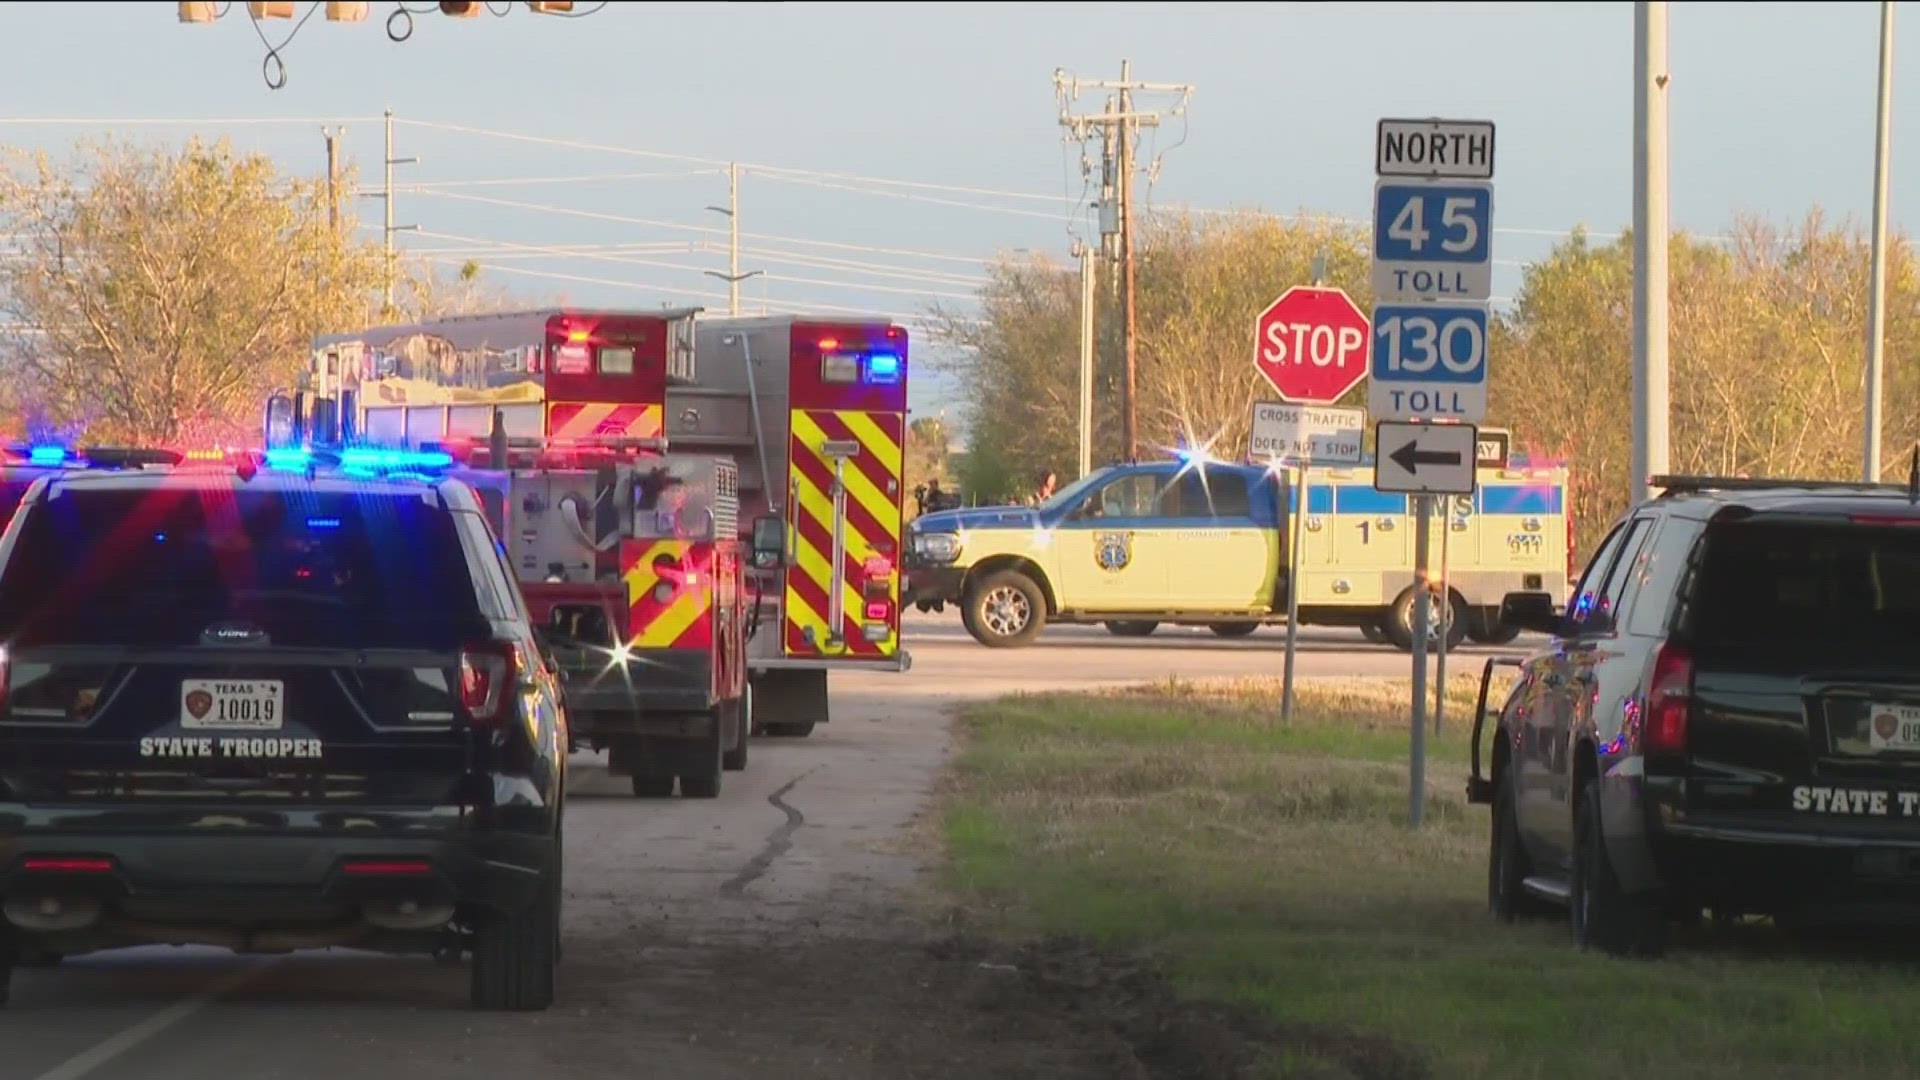 After a multi-vehicle crash in southeast Travis County killed four people, on State Highway 130, nearby residents are calling for safety improvements.